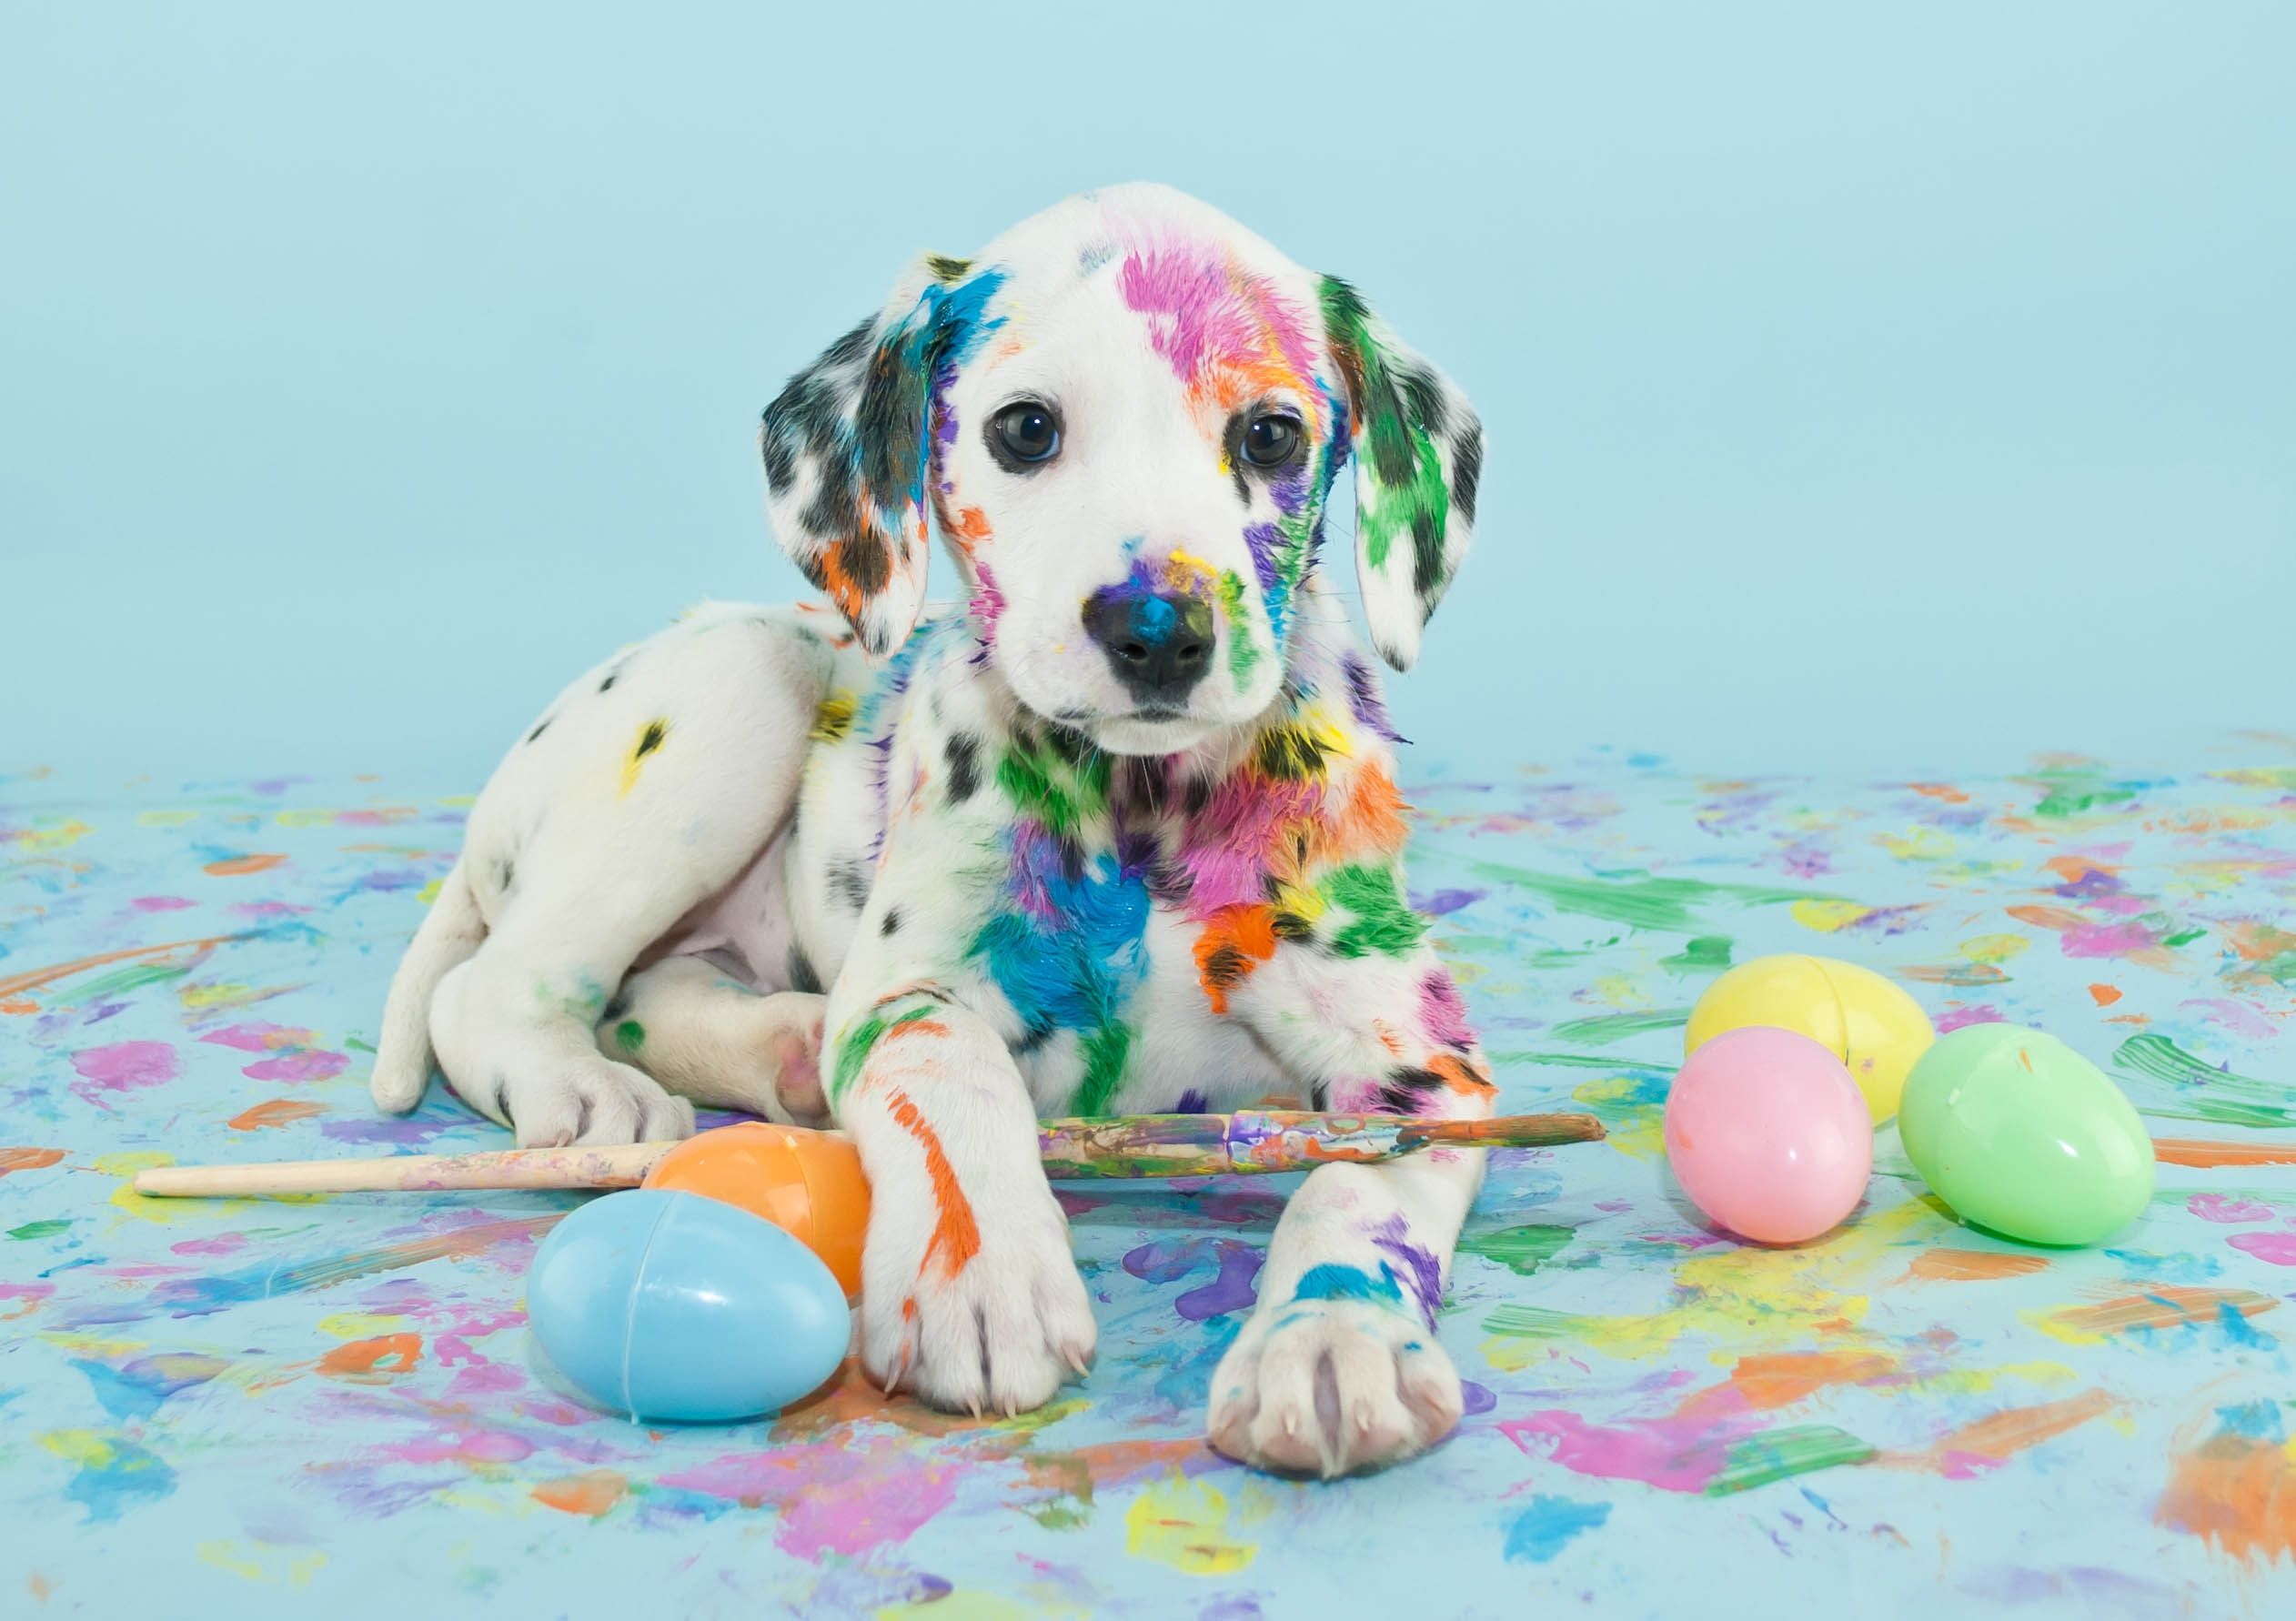 Dogs: Easter Puppy Paint Brush Eggs Dog Dalmatian Wallpaper